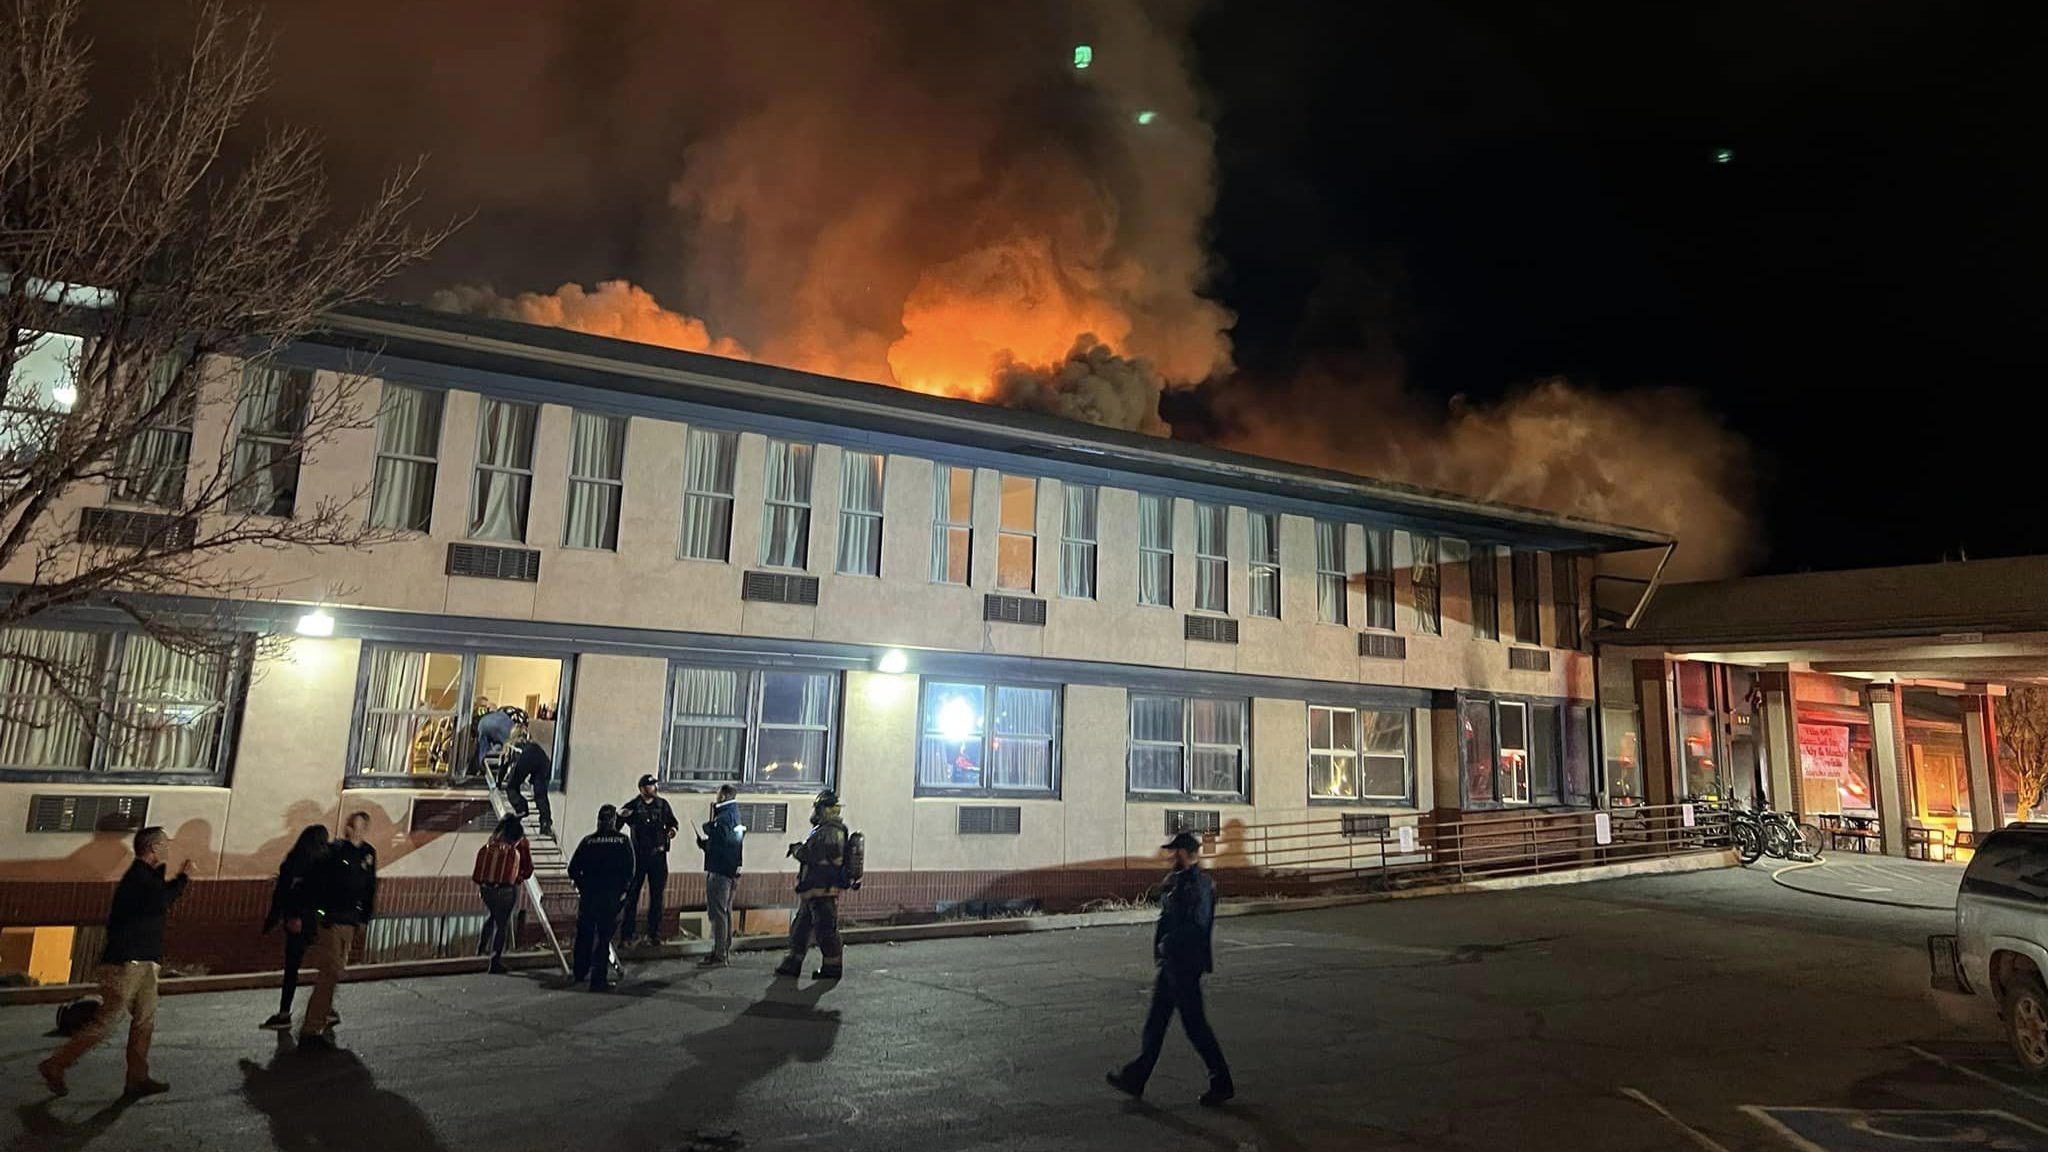 Dozens of residents were displaced after fire at a low income apartment complex in Richfield, Utah....